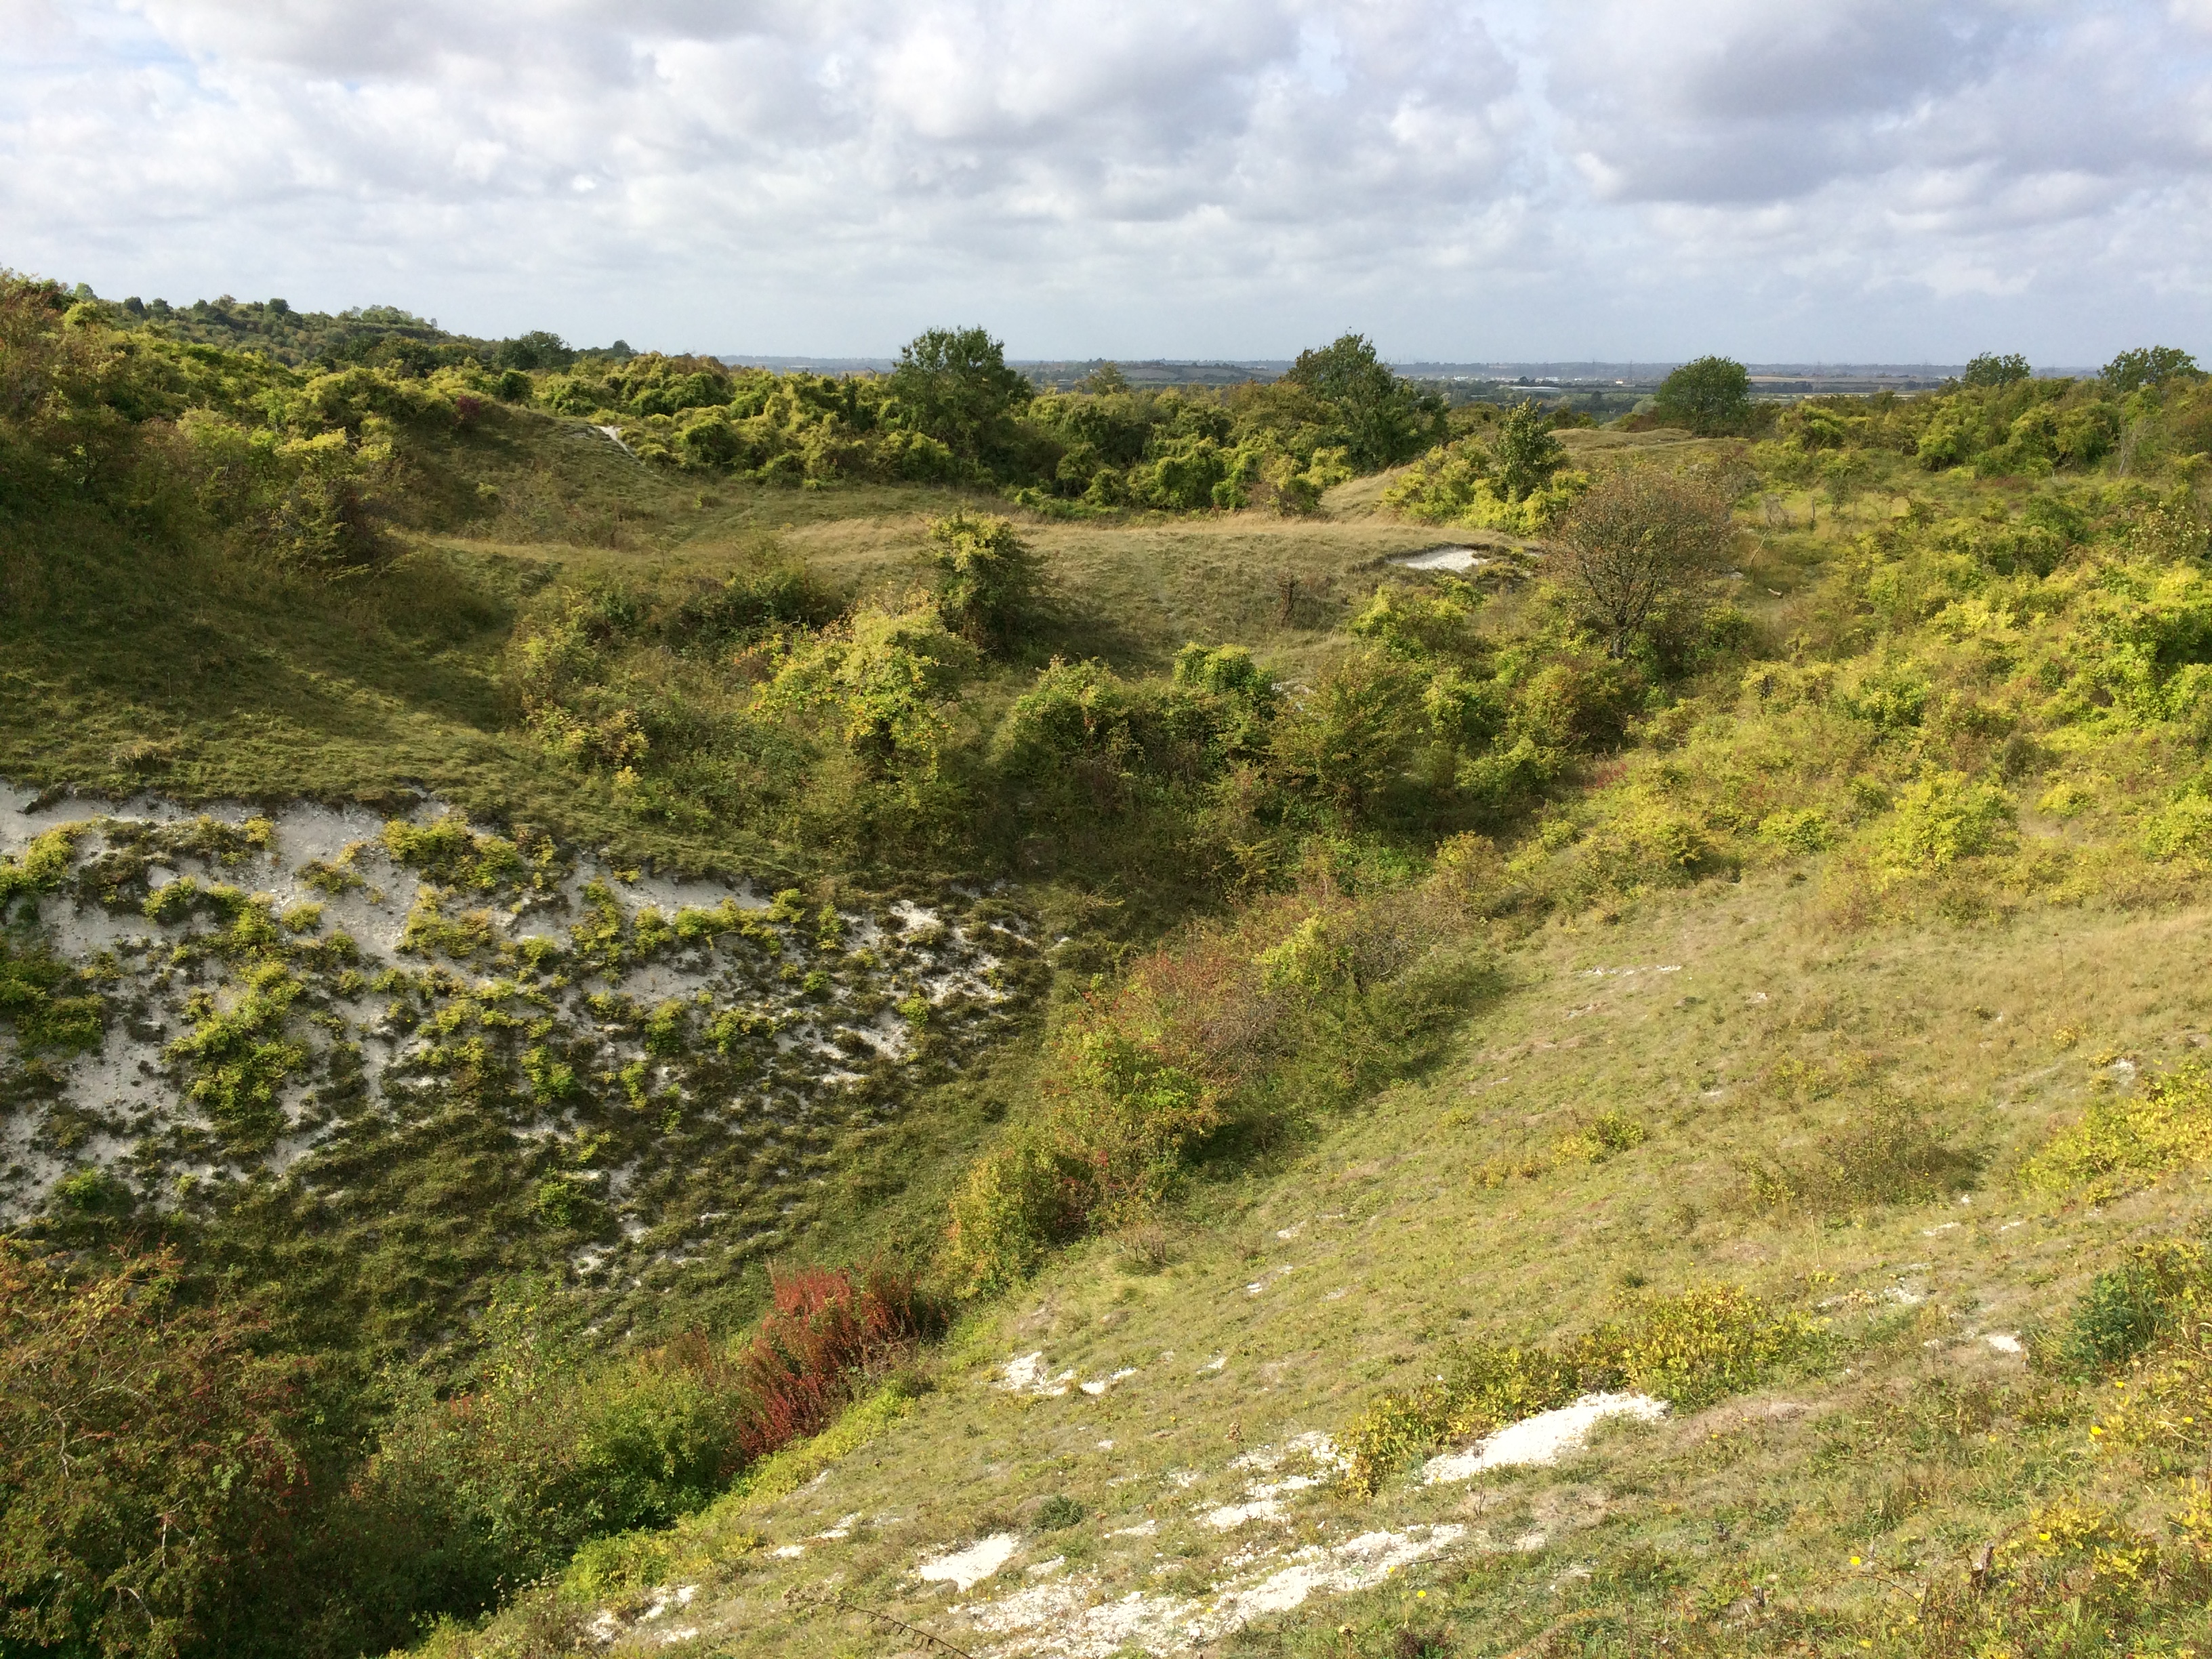 Totternhoe Quarry Nature Reserve, managed by the Wildlife Trust for Bedfordshire, Cambridgeshire and Northamptonshire